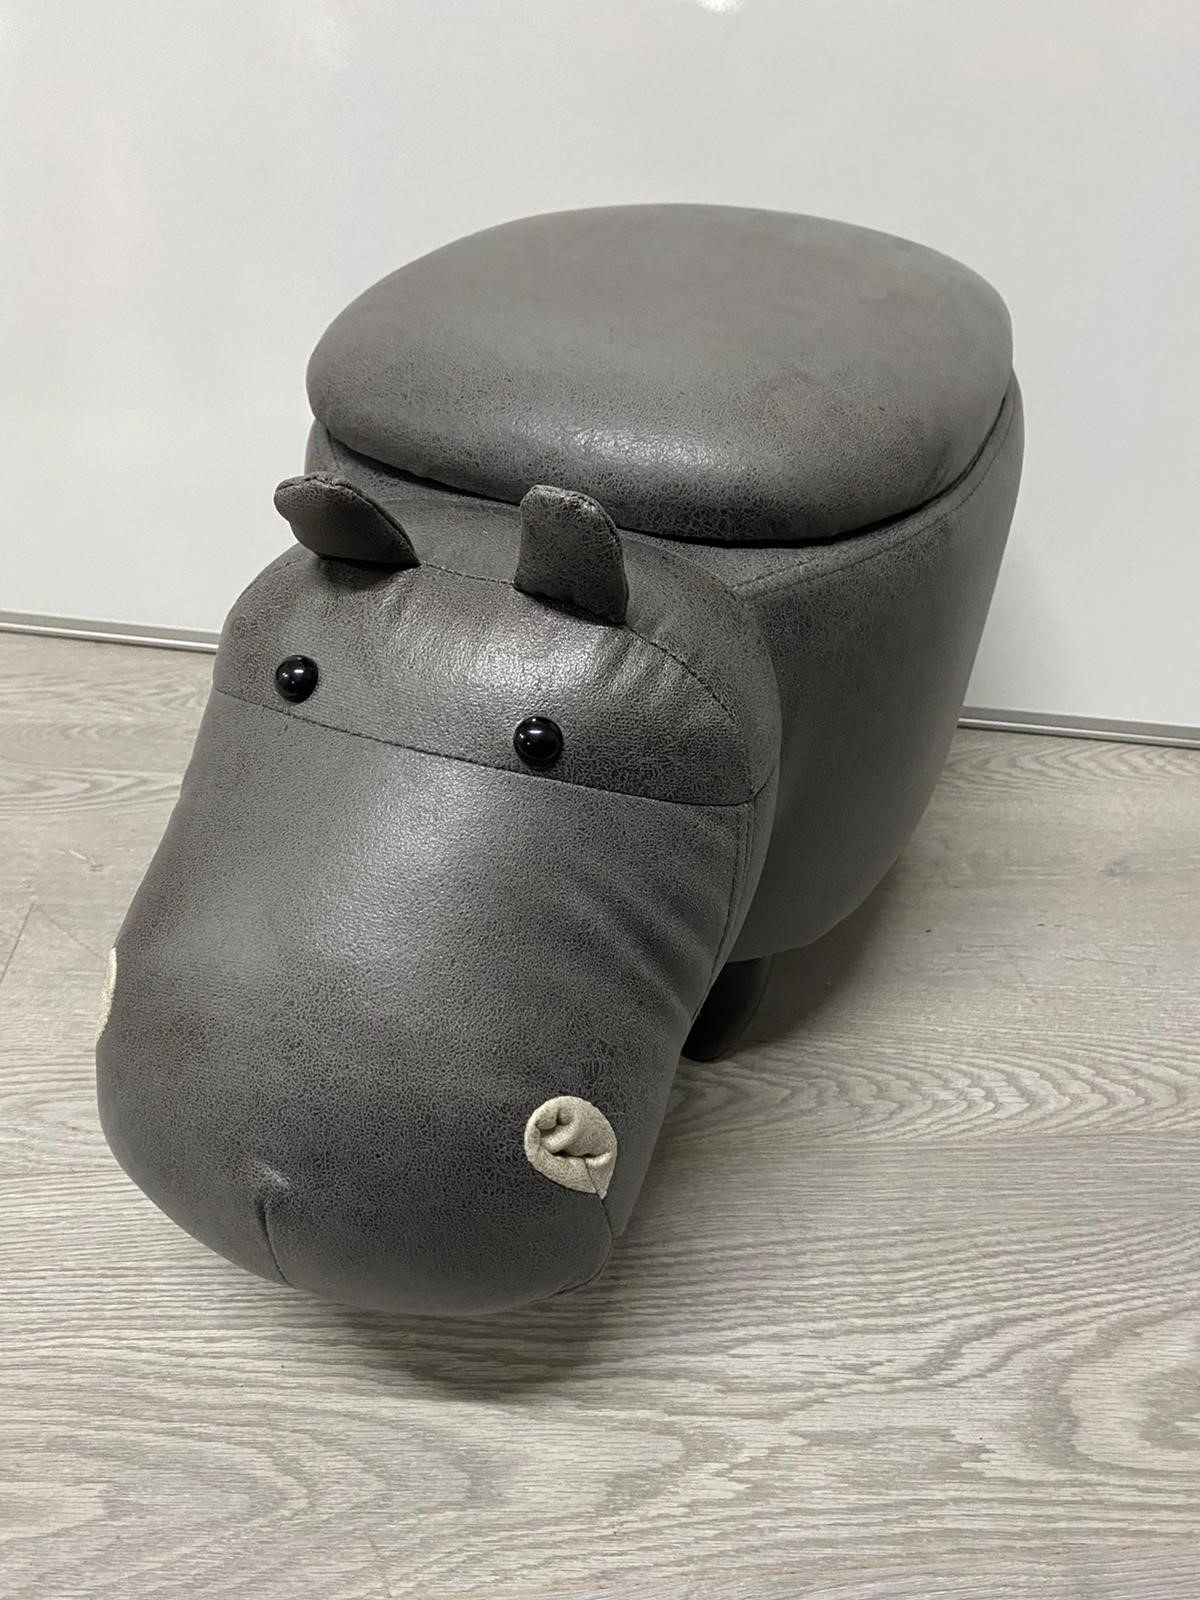 Small Hippo storage stool 34cm in height - Image 2 of 3